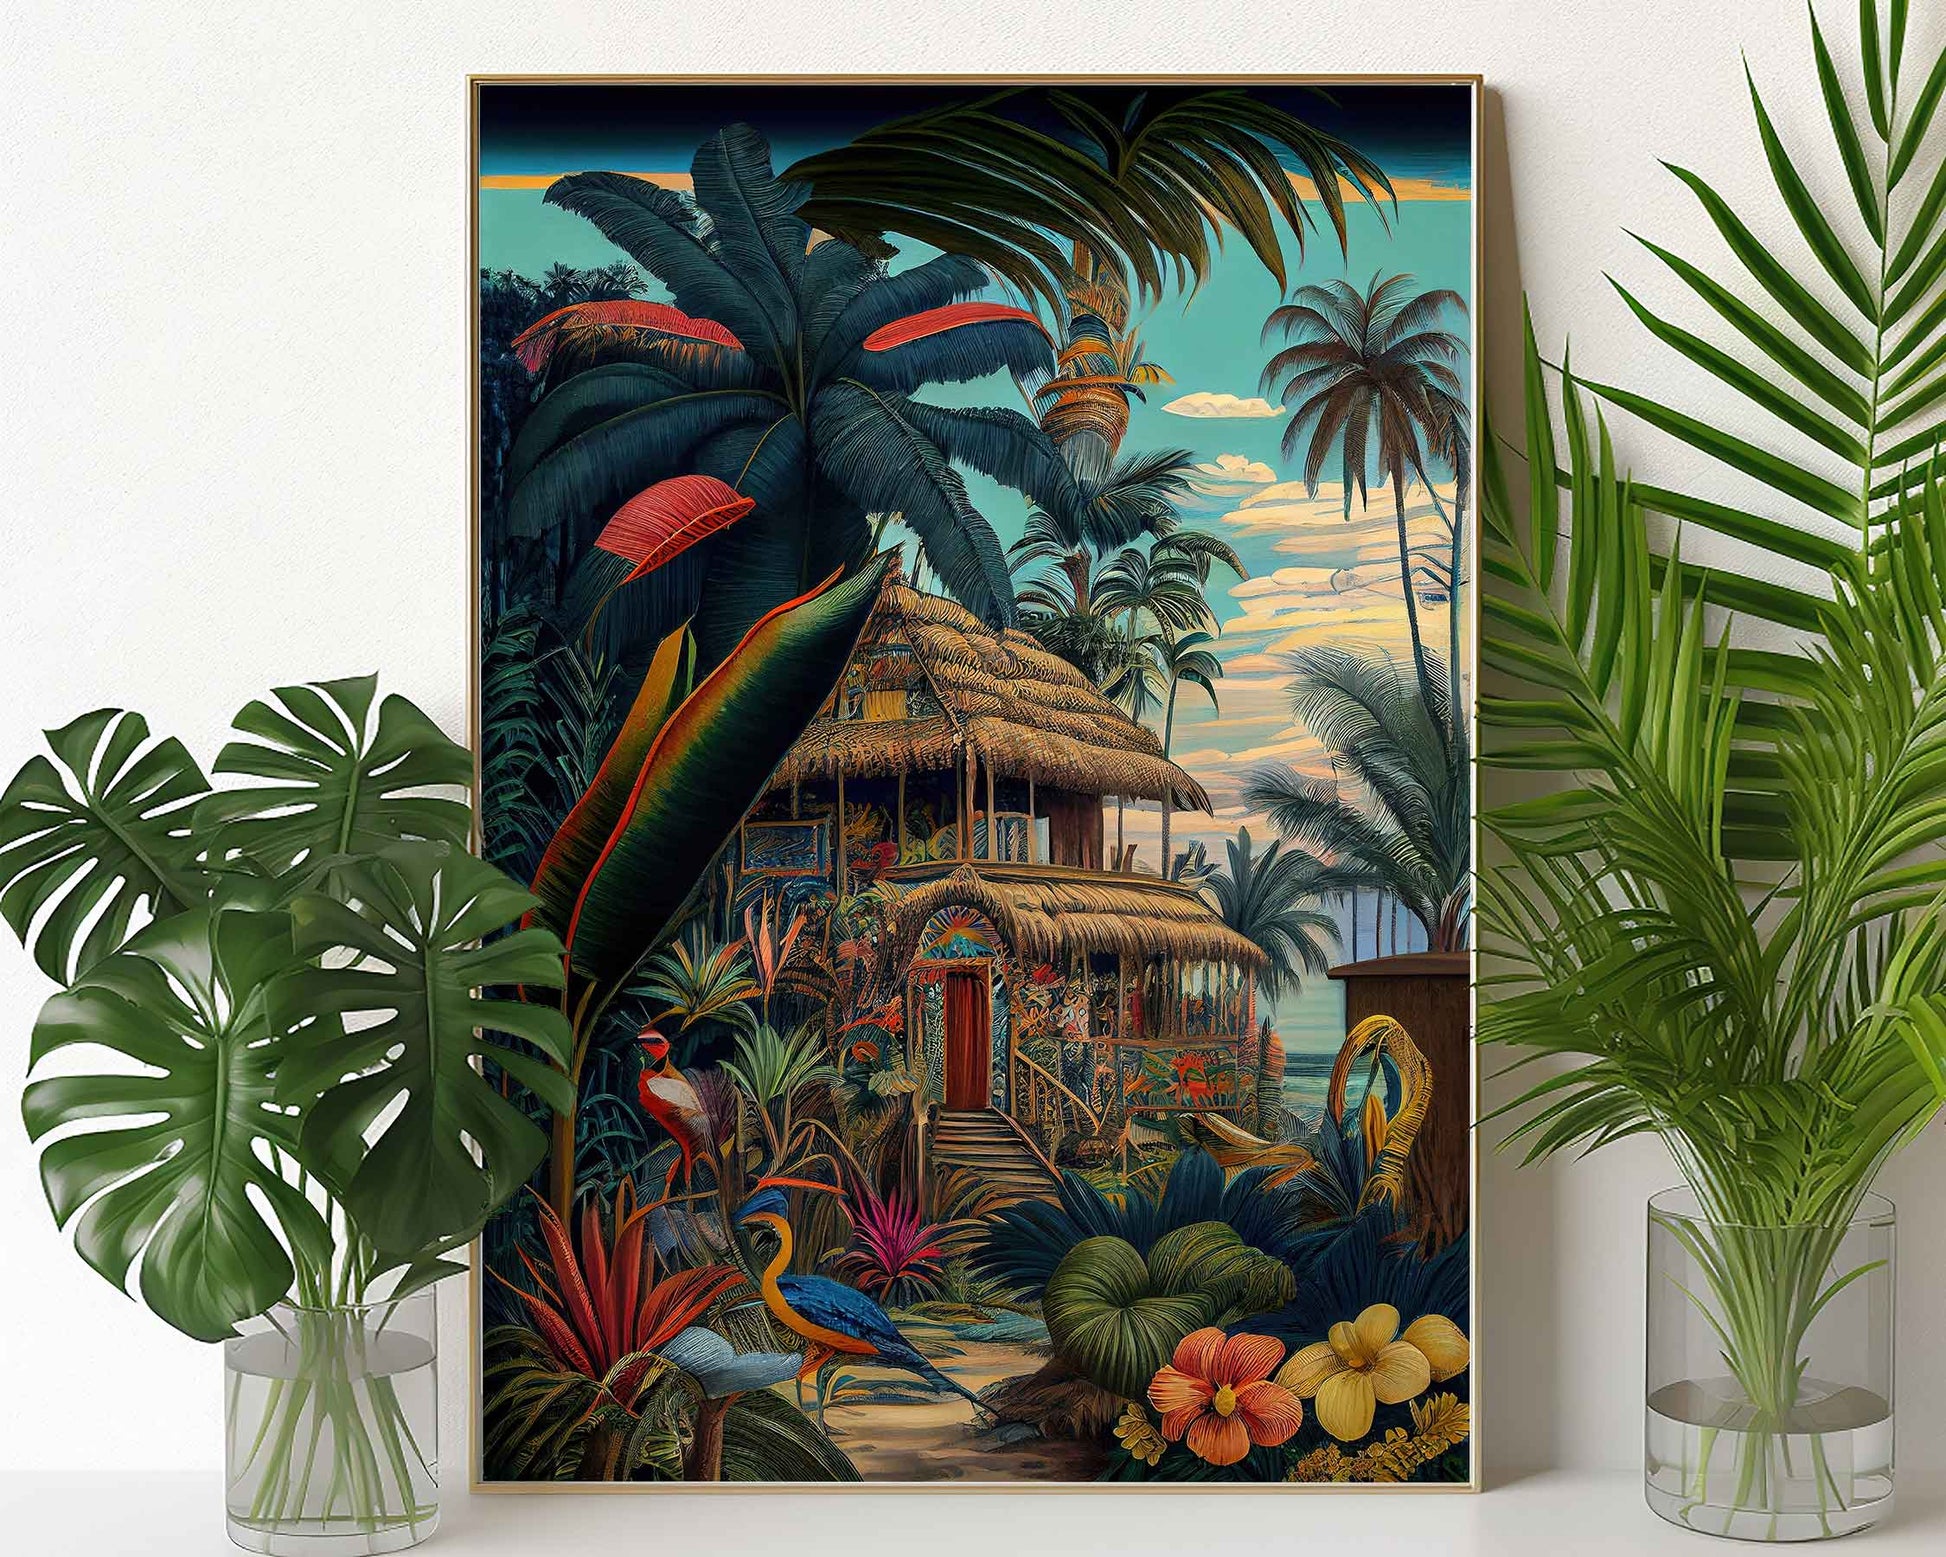 Framed Image of Jungle Botanical Wall Art, Maximalist Style Oil Painting Prints